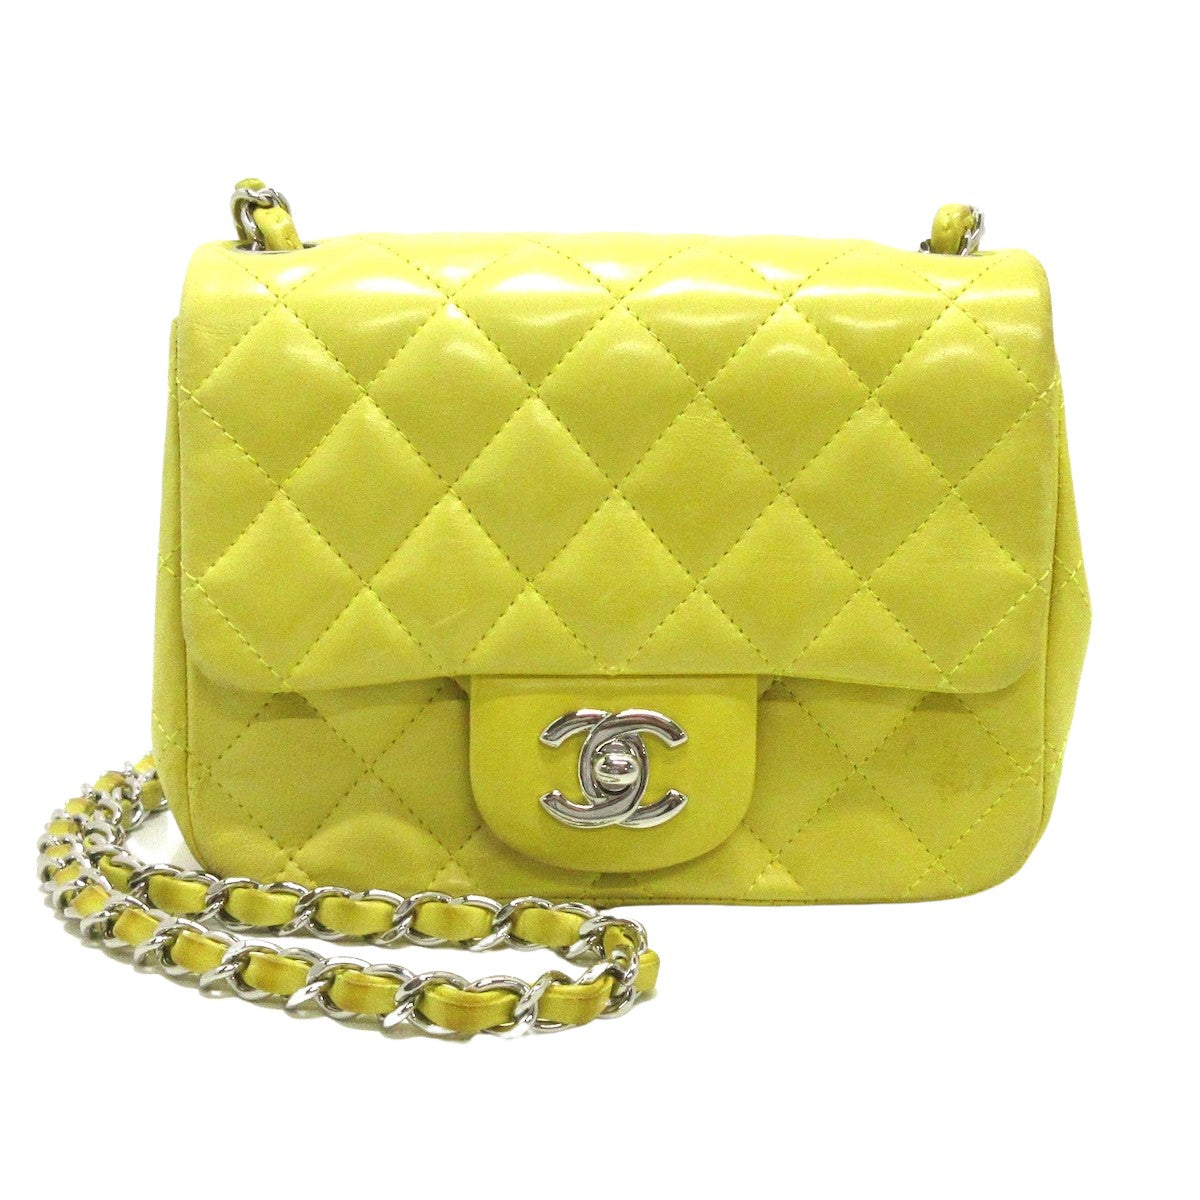 CHANEL Mini Rectangular Flap Quilted Leather Crossbody Bag